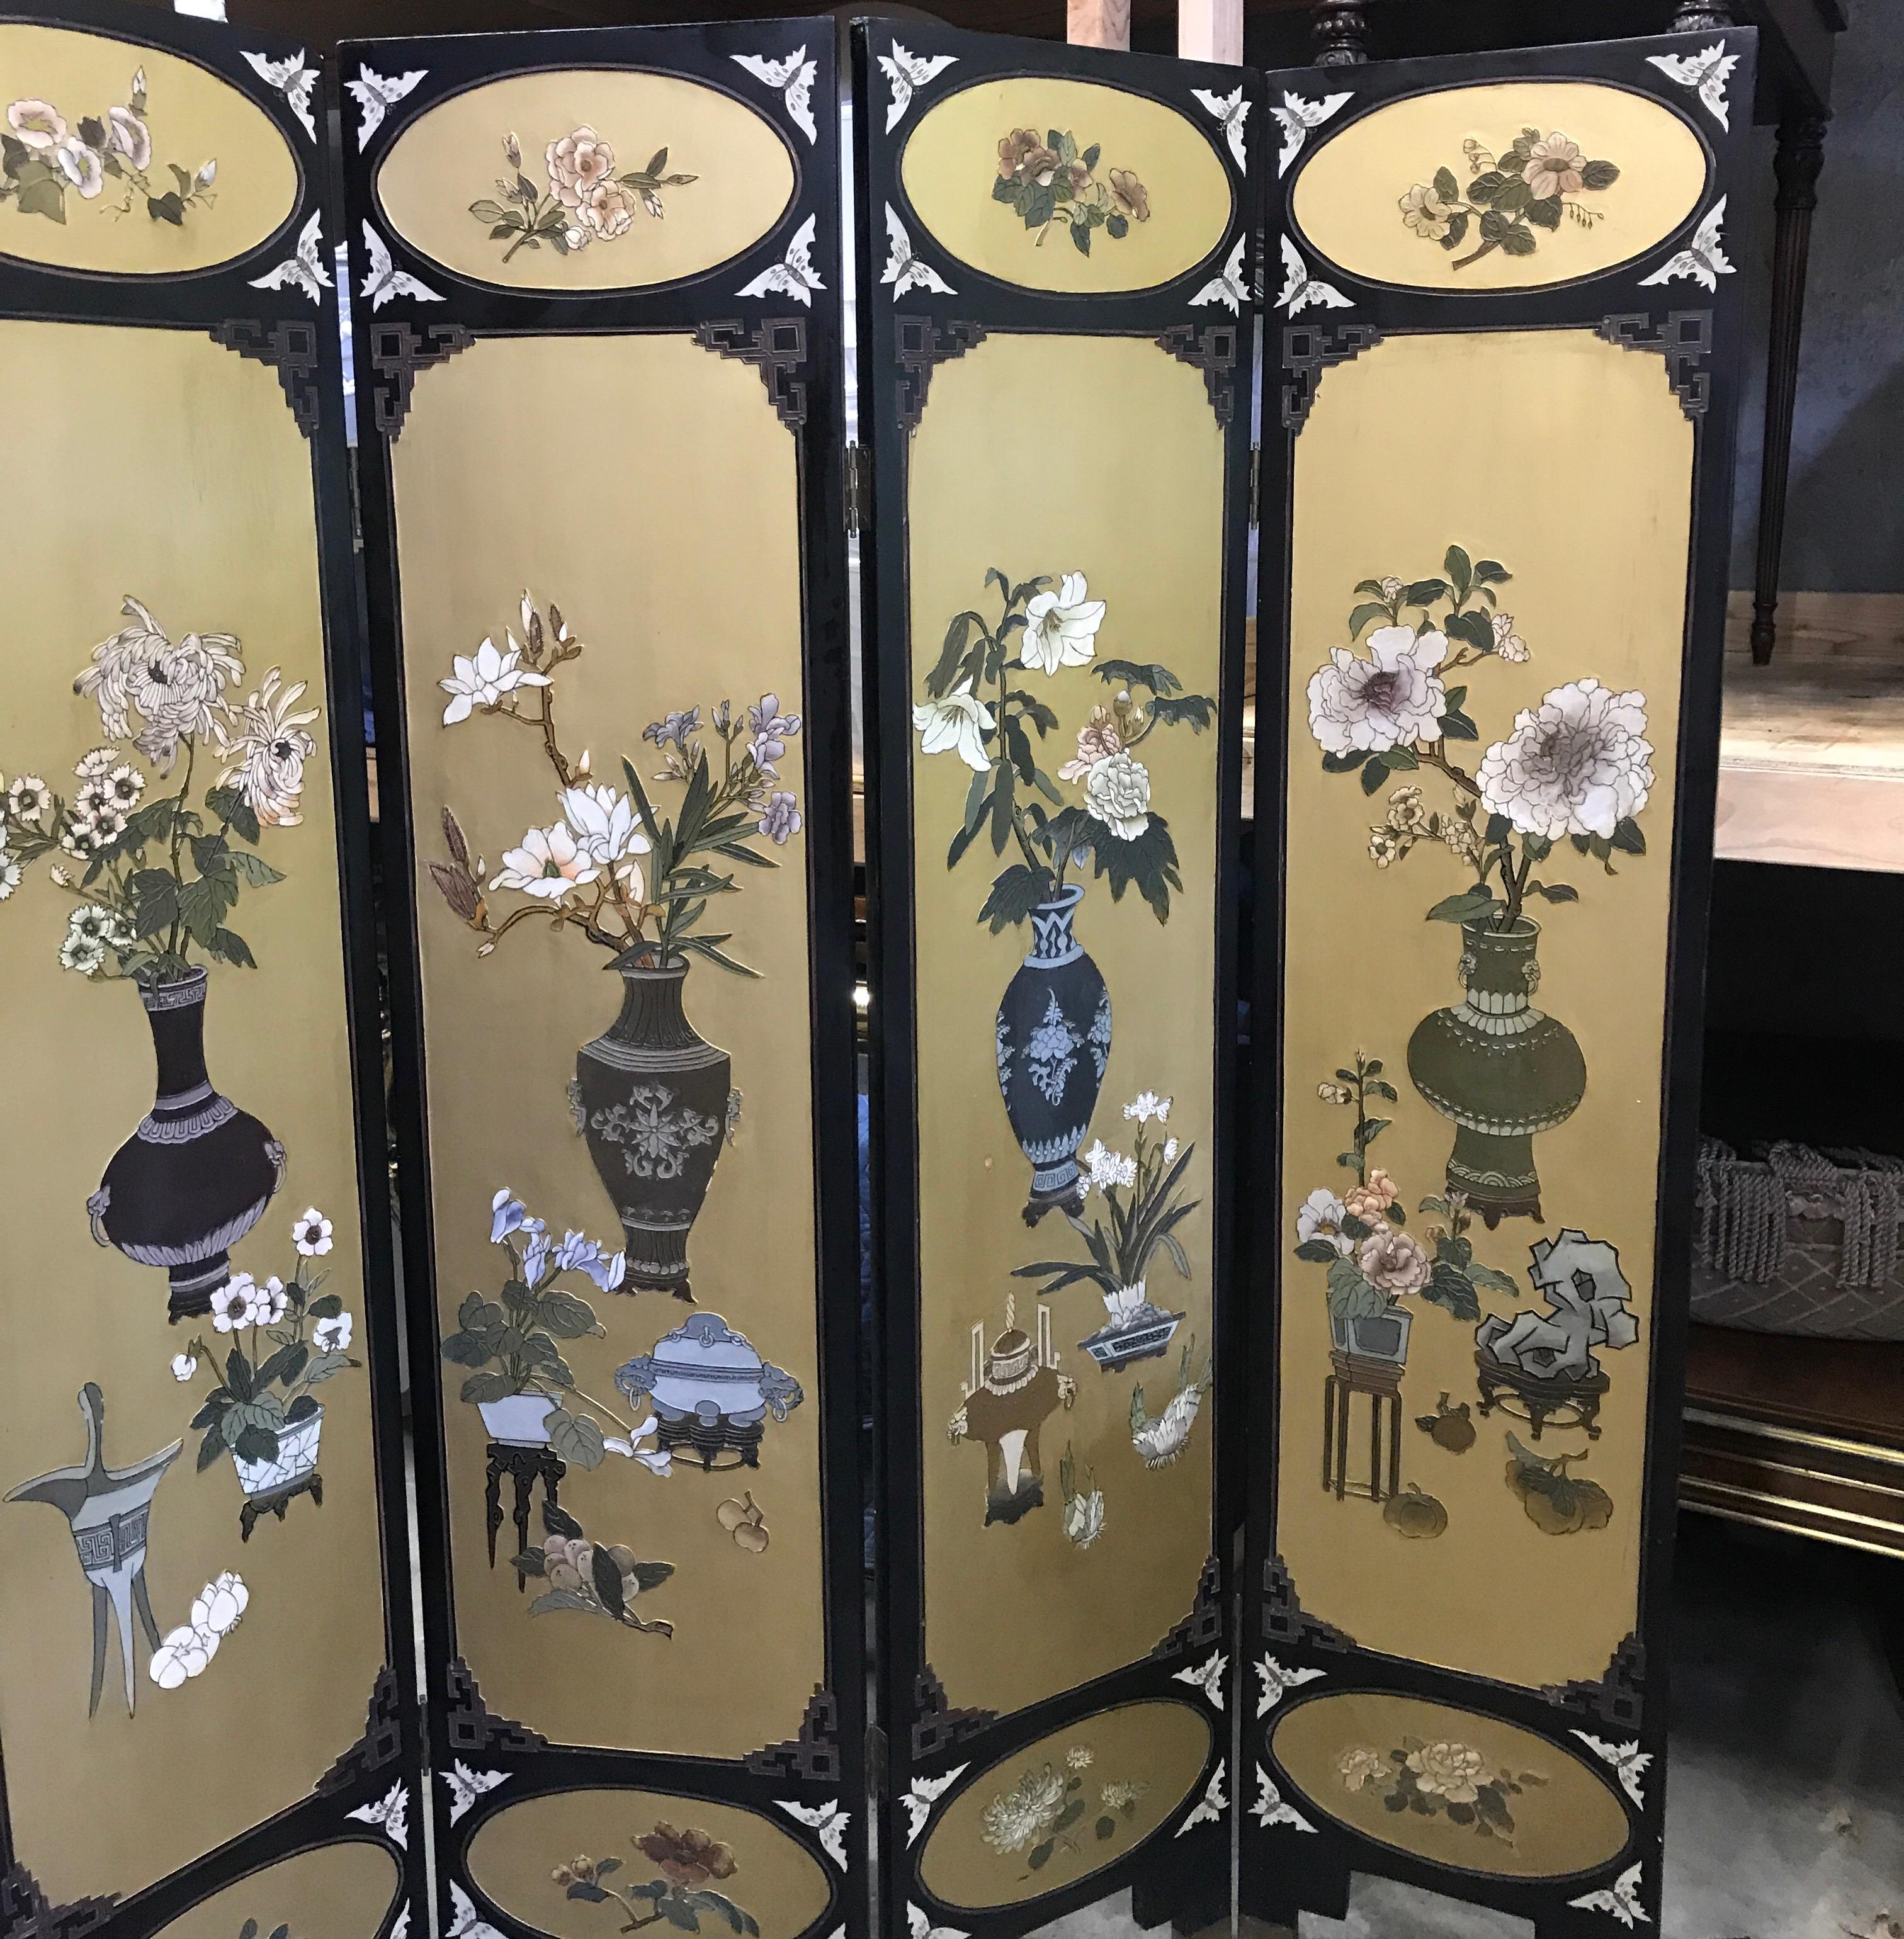 The Coromandel screen in black with large gilt cartouches with images of Chinese porcelain vases with floral decoration. The back in black lacquer with engraved decoration. This is a unique and beautiful screen with a lot of gold background, 

The